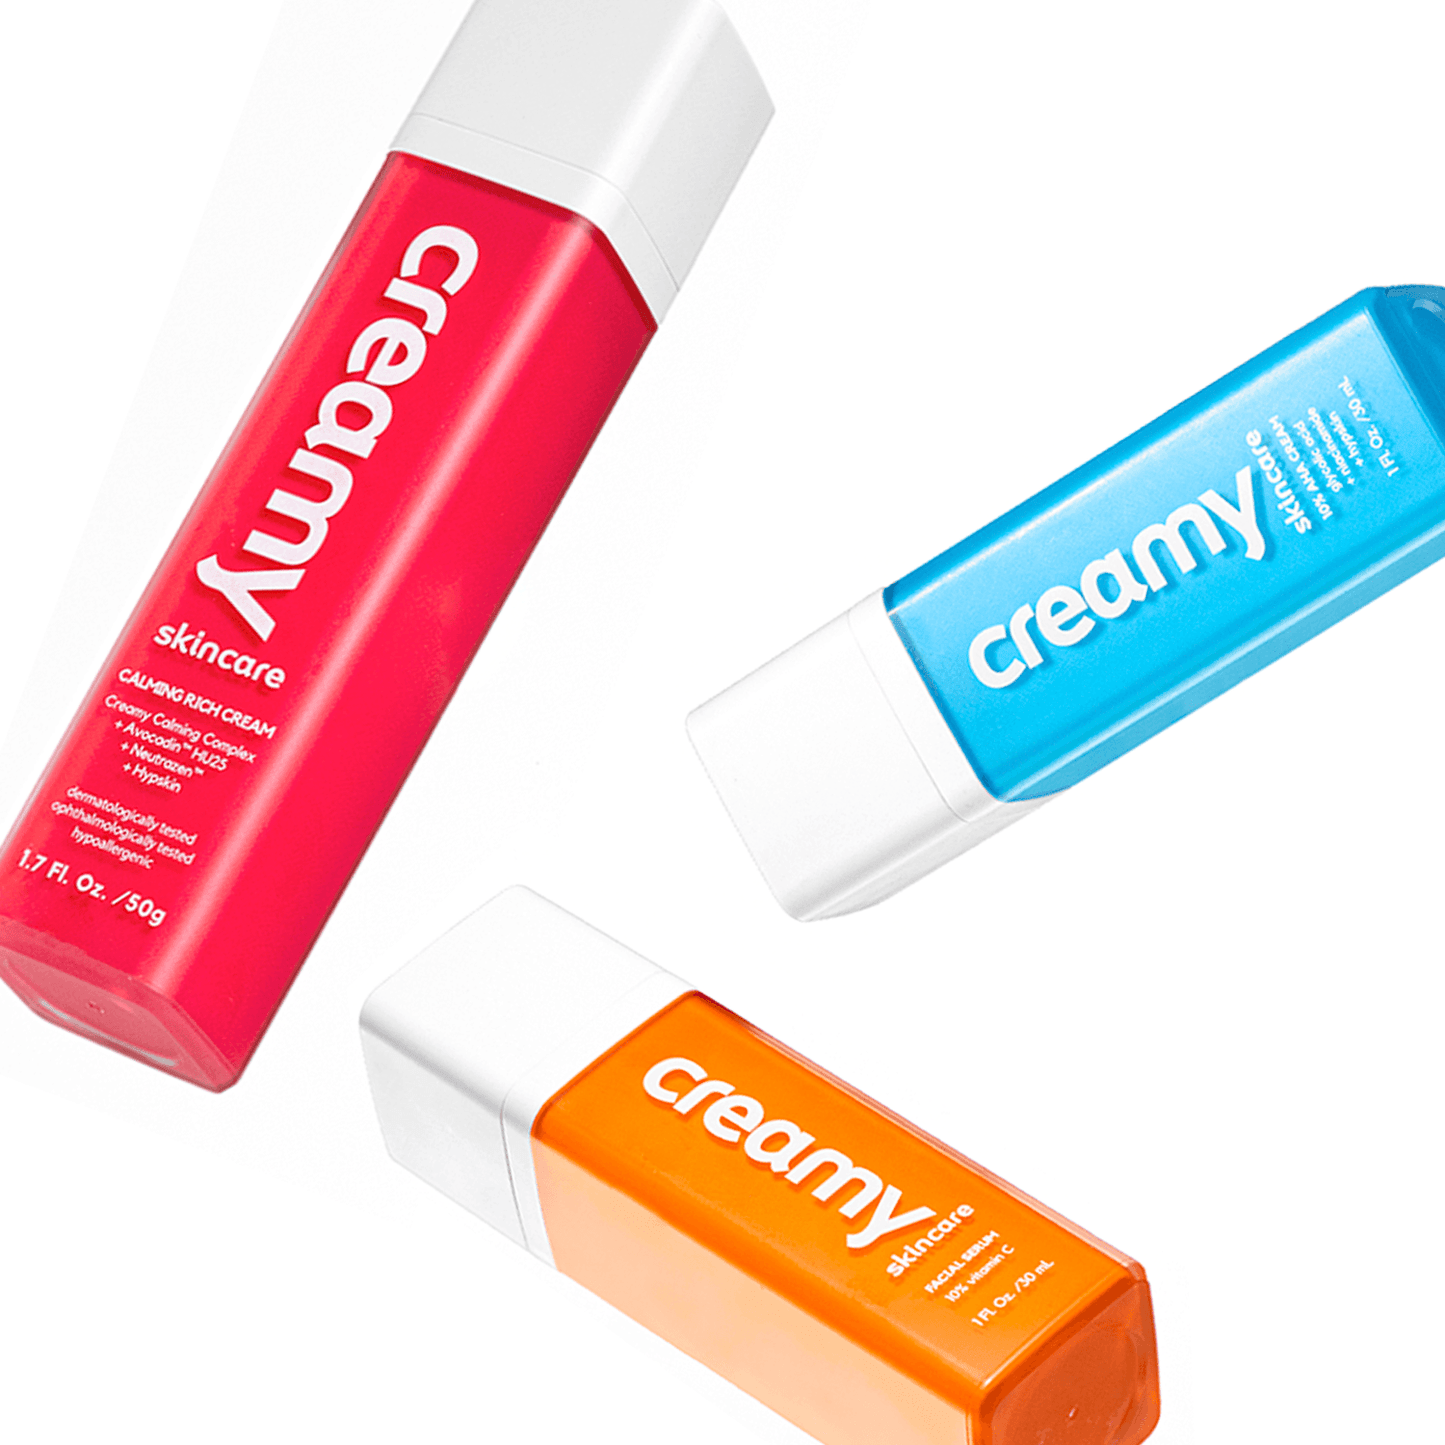 Youth Boosting Kit - Creamy Skincare